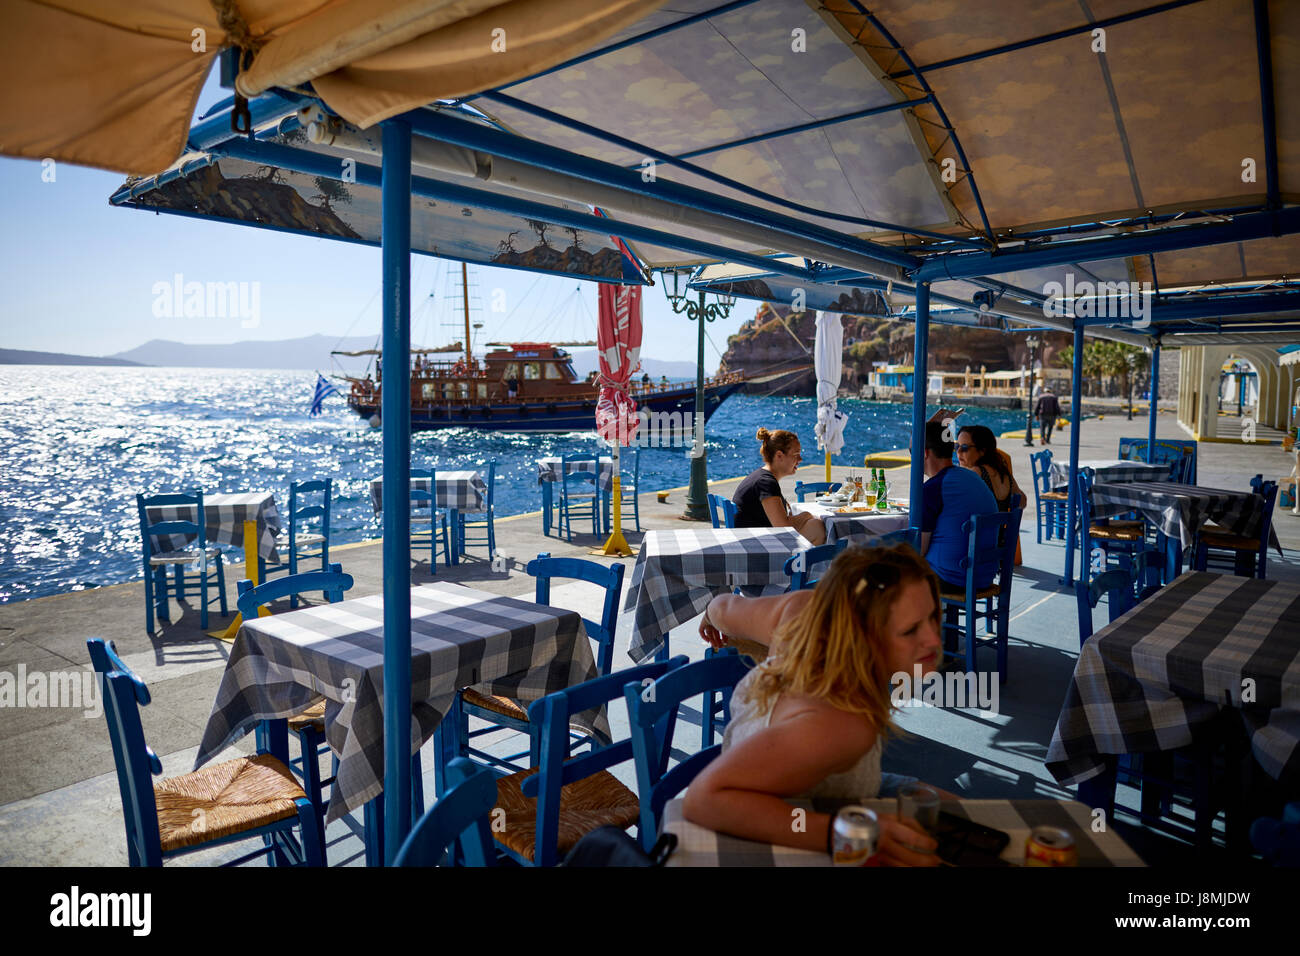 Volcanic Greek island Santorini one of the Cyclades islands in the Aegean Sea. Fira the islands capital old town harbour restaurant. Stock Photo